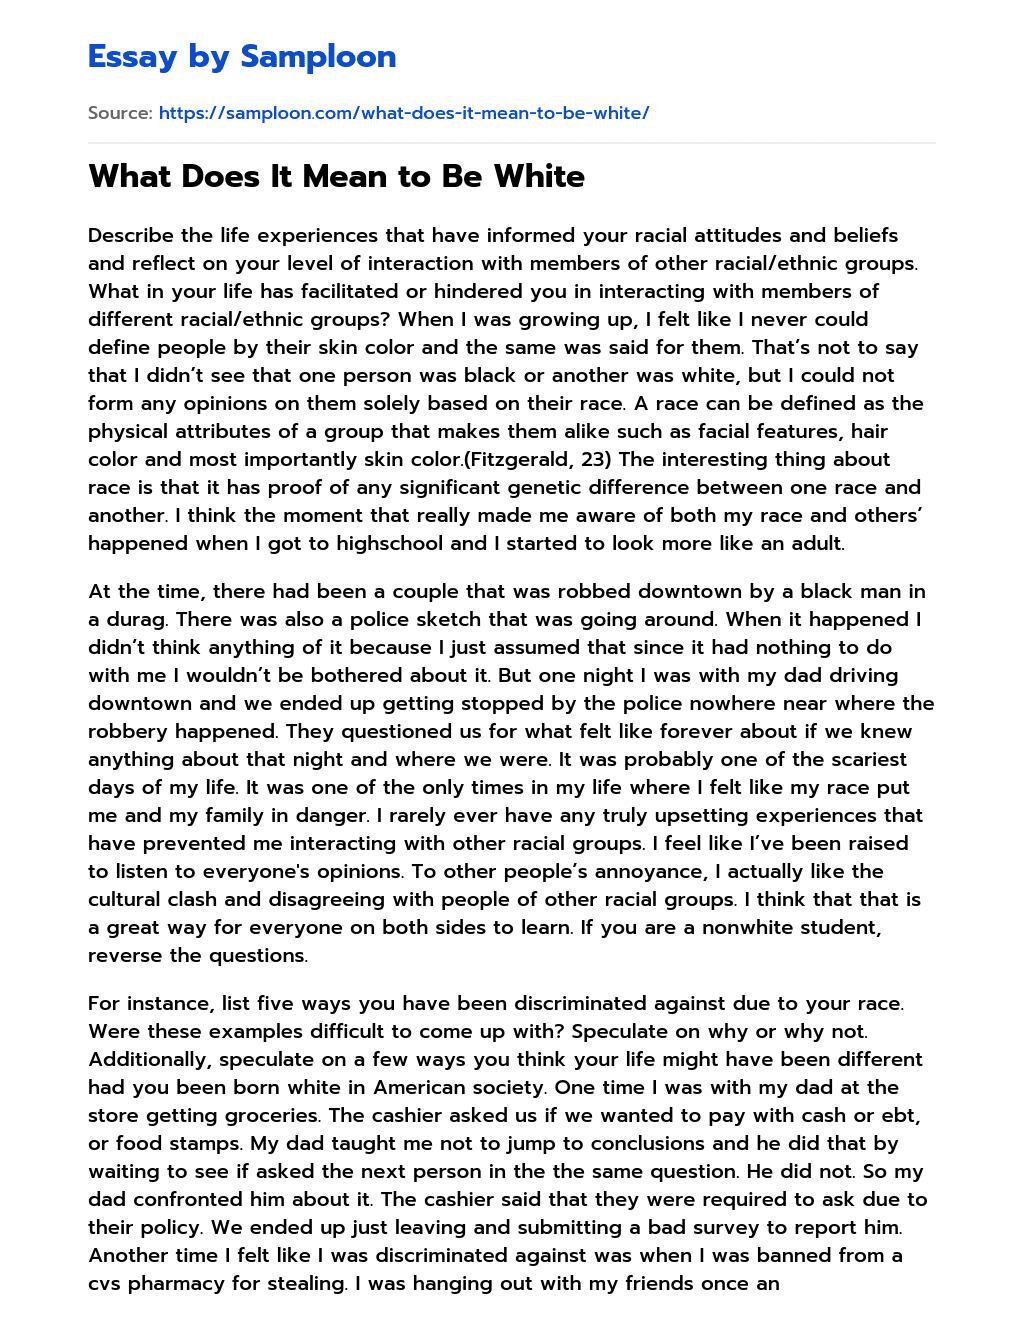 What Does It Mean to Be White essay